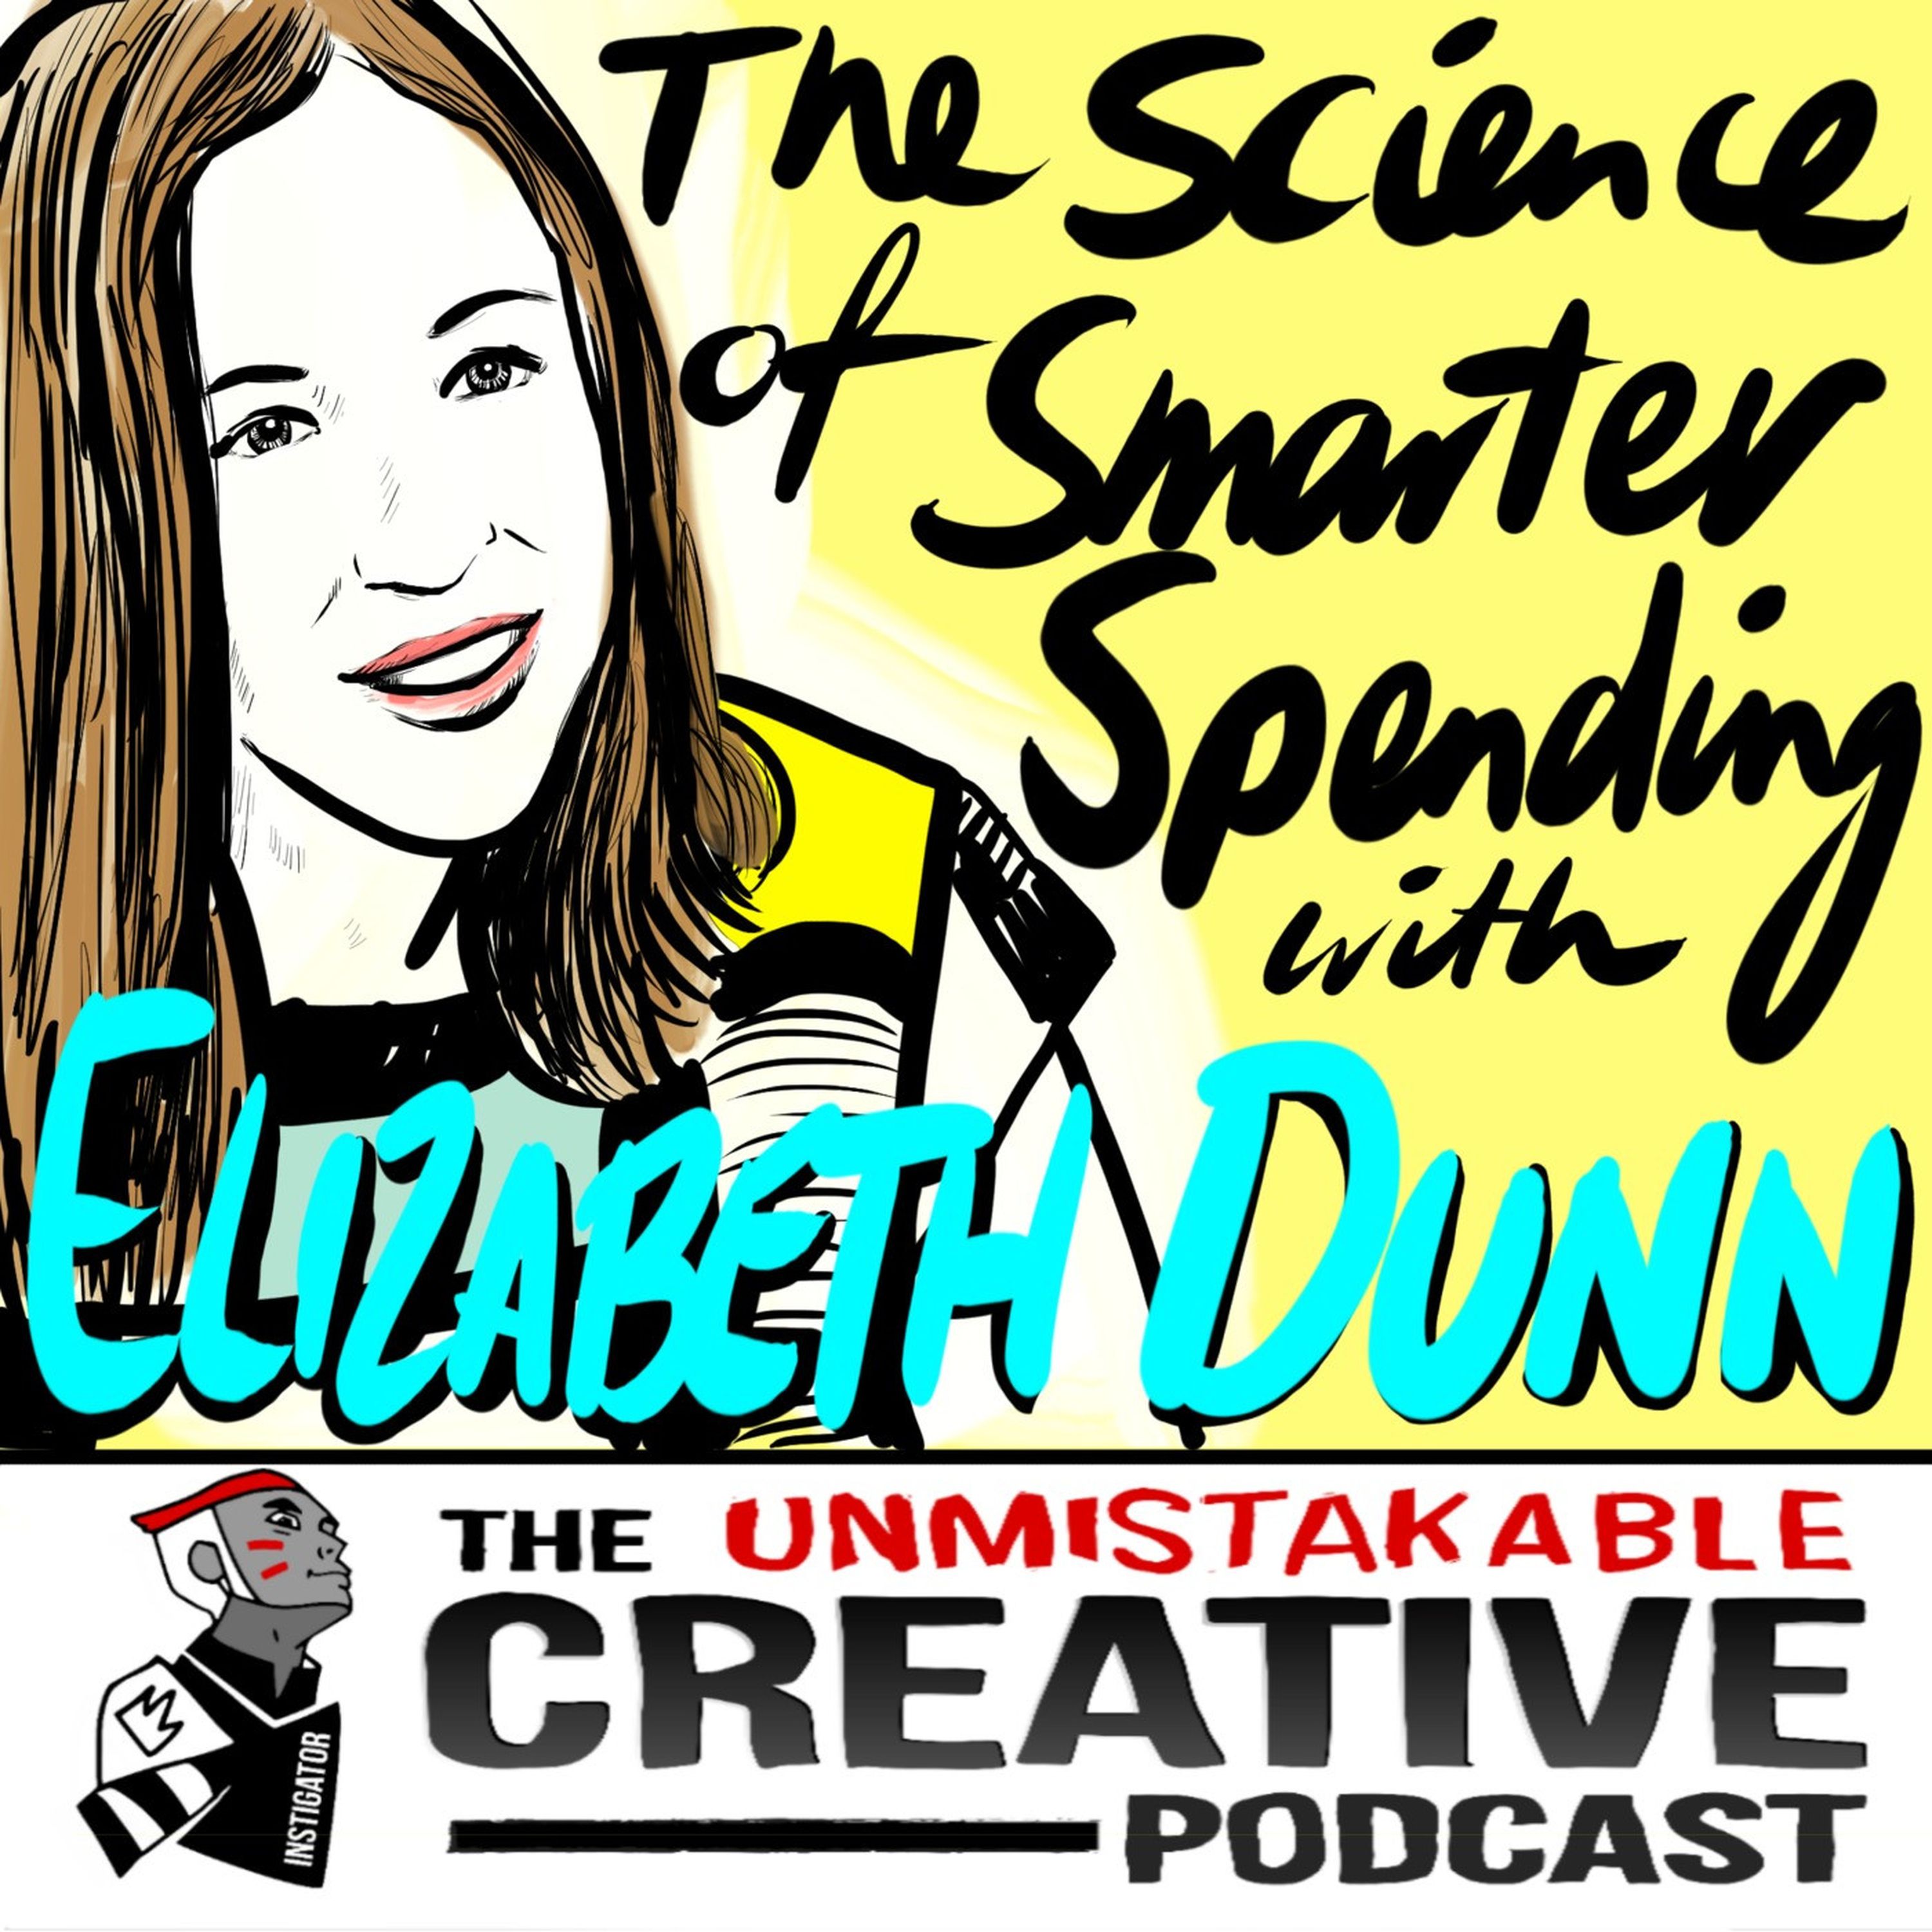 The Science of Smarter and More Meaningful Spending with Elizabeth Dunn